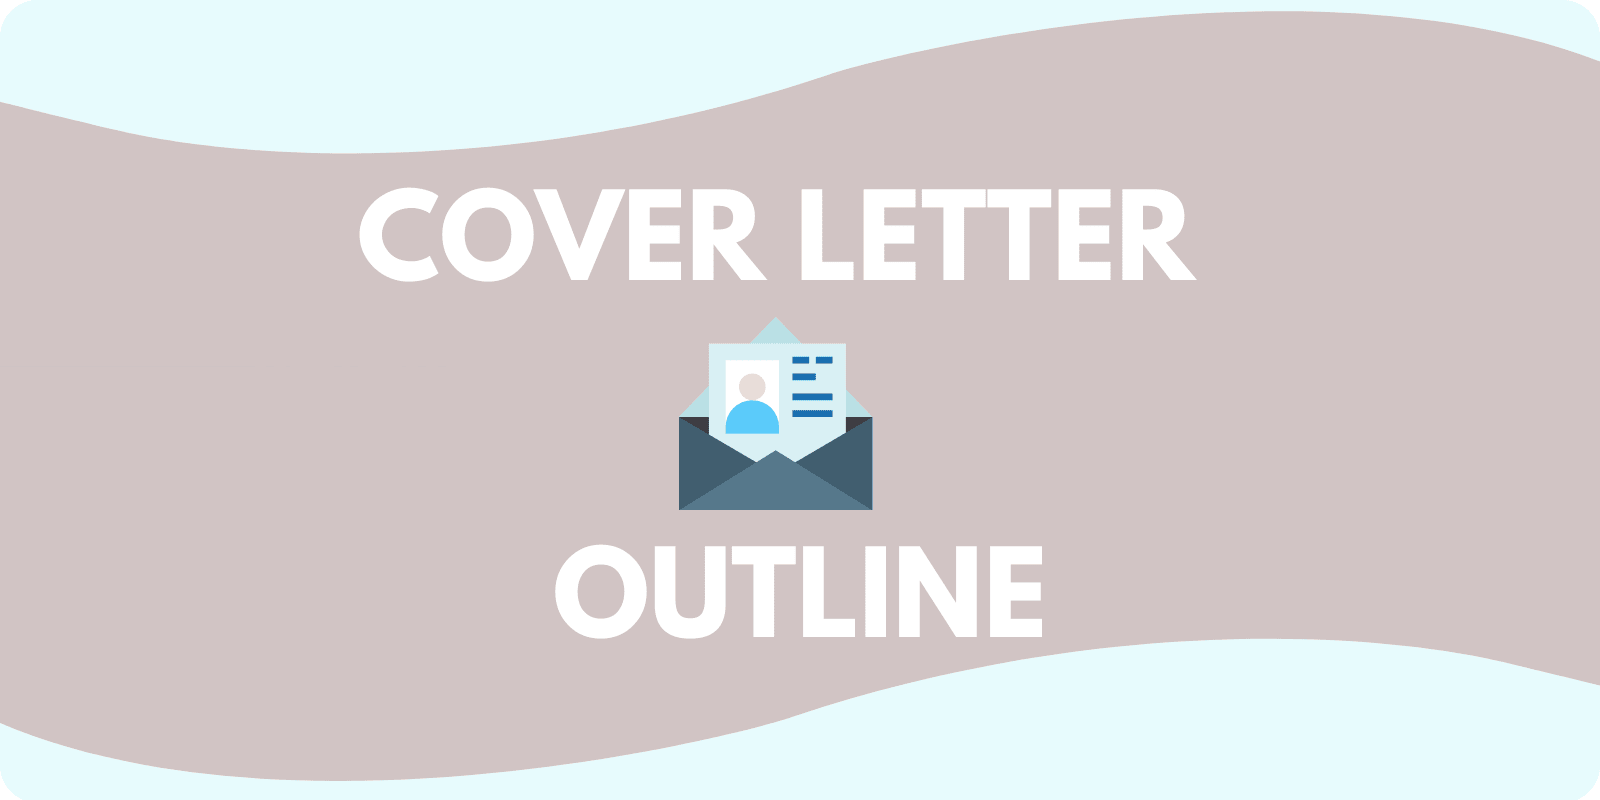 A graphic with the words "Cover Letter Outline"